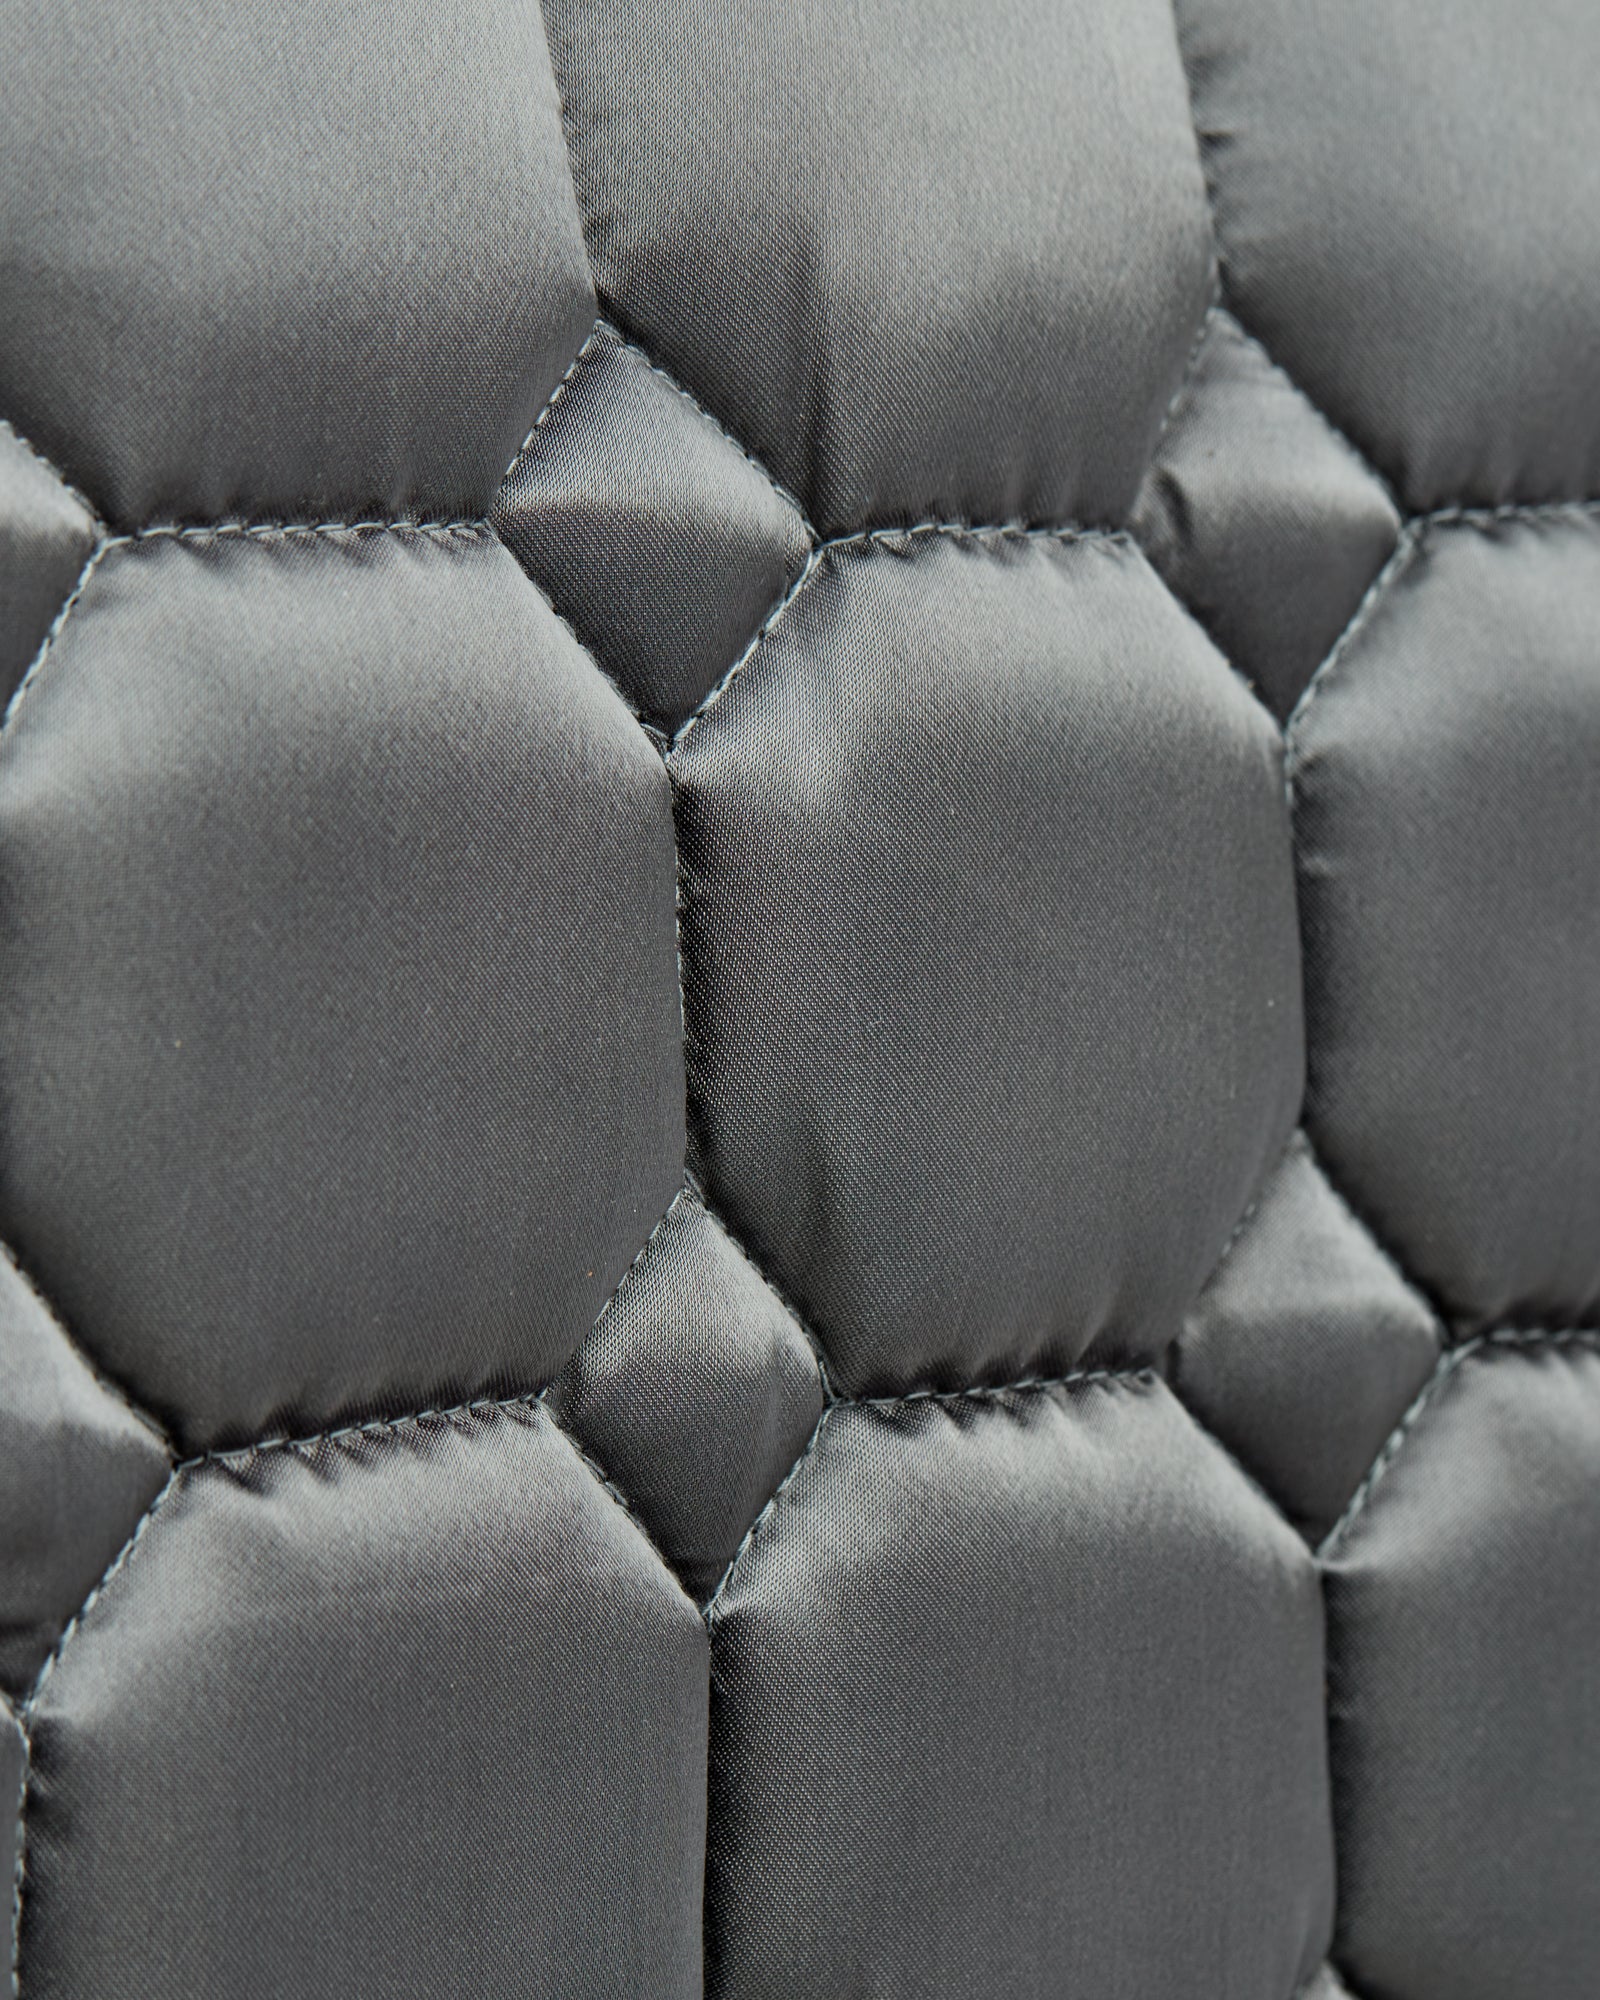 Equestrian luxury quilted Grey satin dressage cut saddle pads/numnahs.